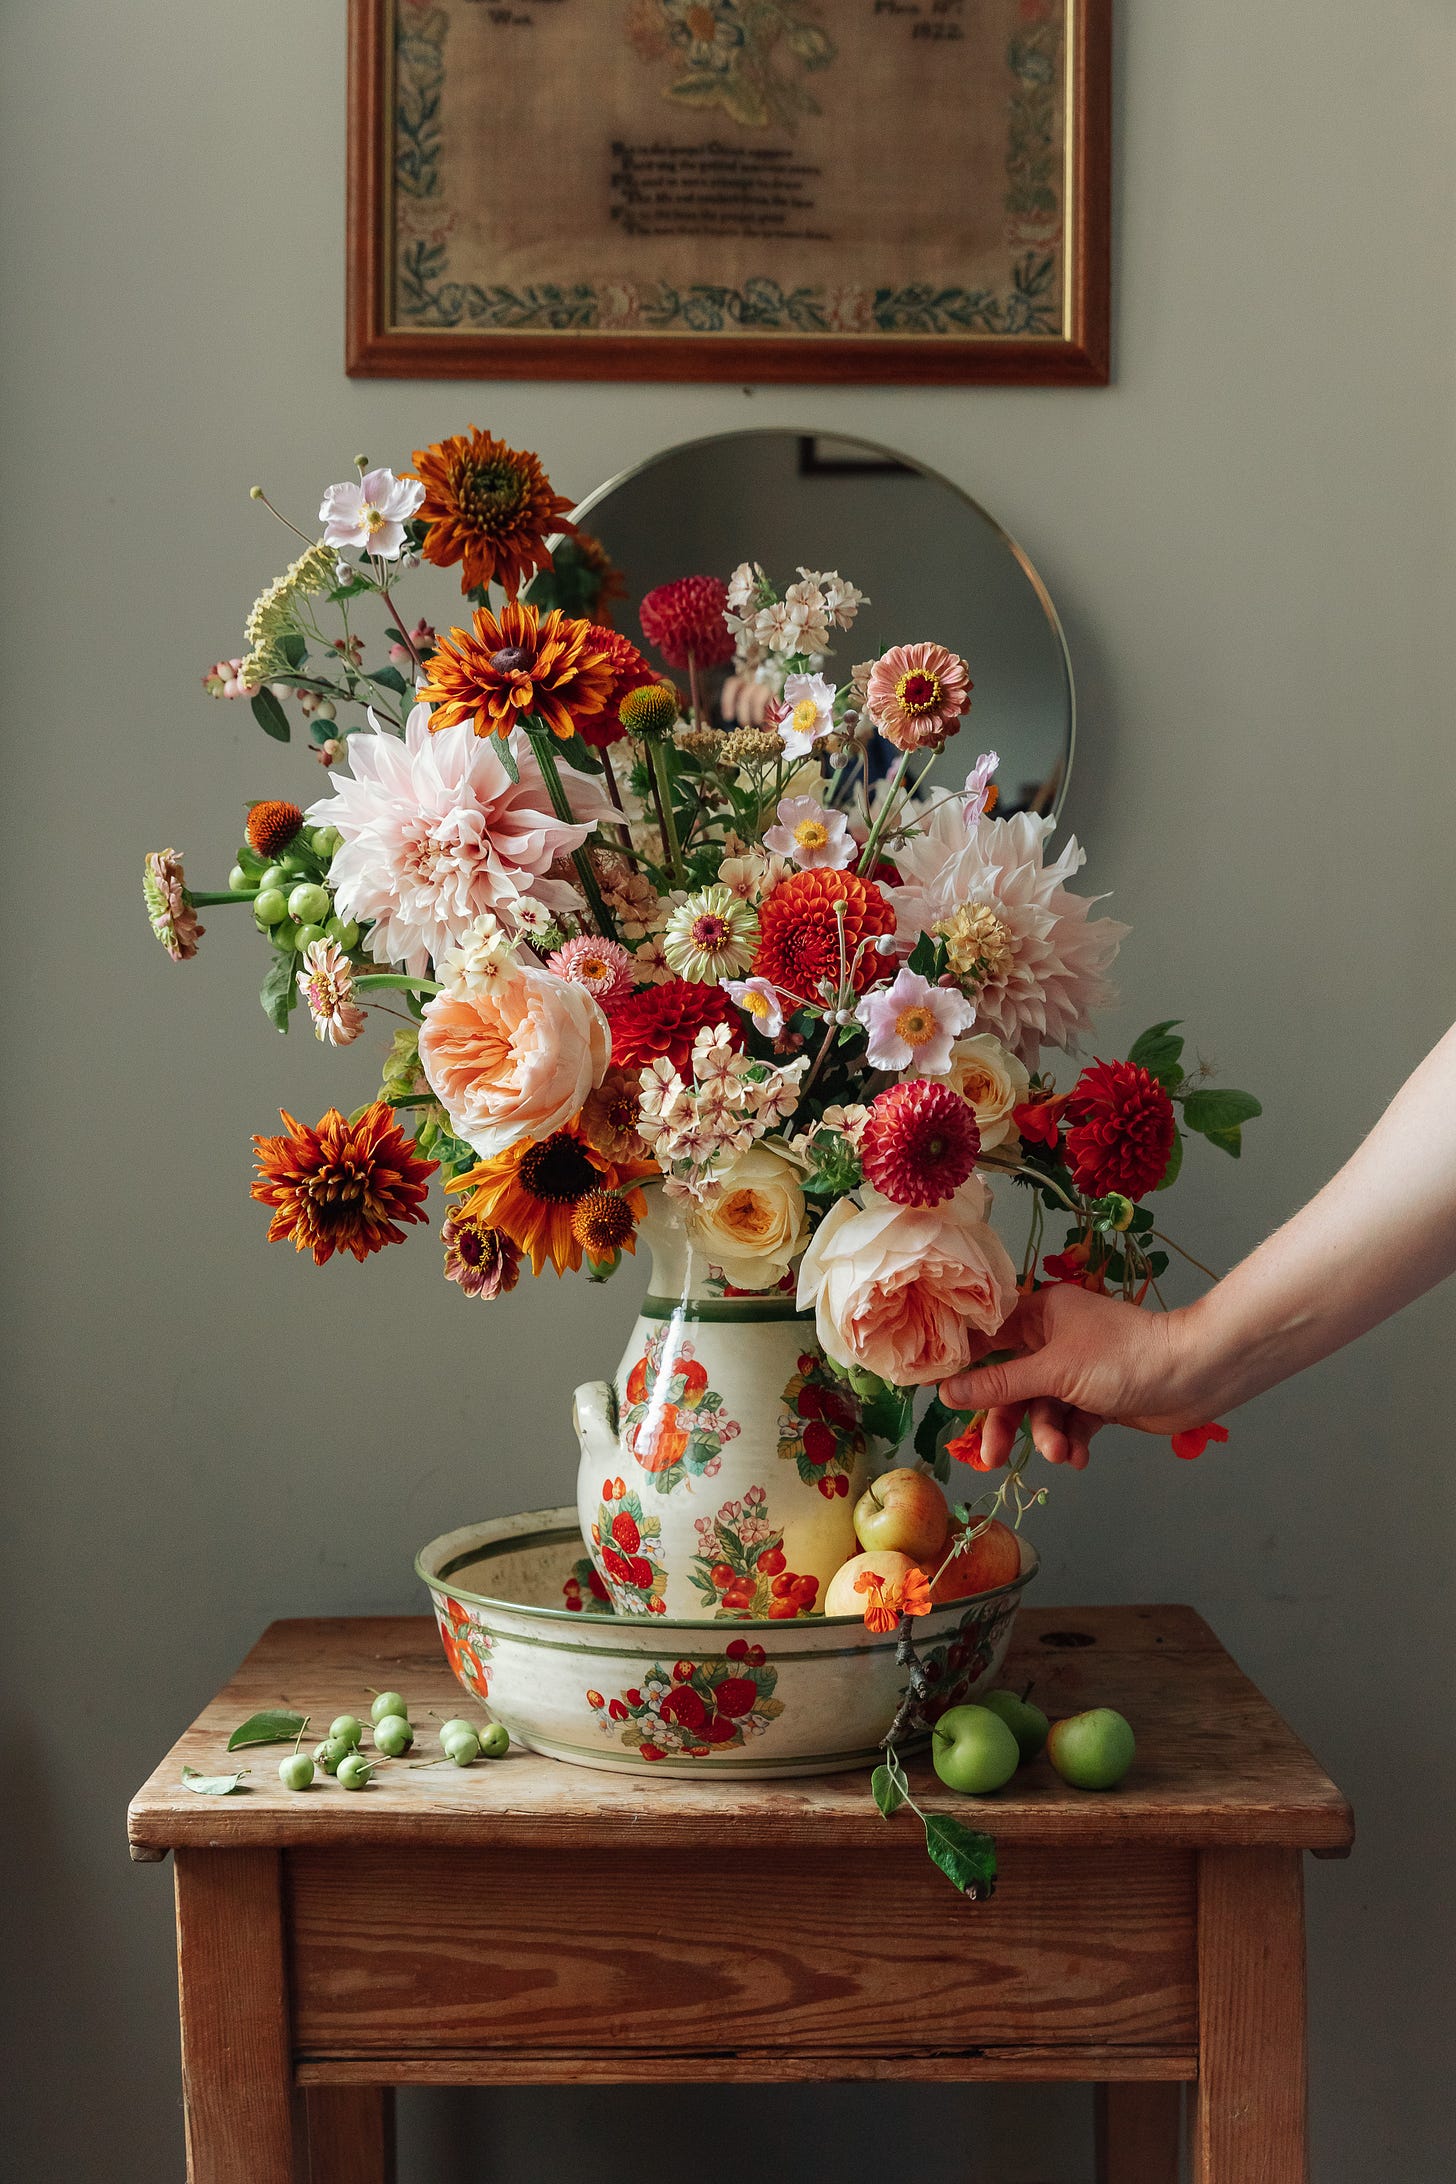 An arrangement of summer flowers of all shapes and sizes in a jug. The jug is ceramic and sat in a matching bowl on a wooden table against a wall. There is a framed embroidery sample above the flowers and a hand coming into frame on the right to adjust the flowers.